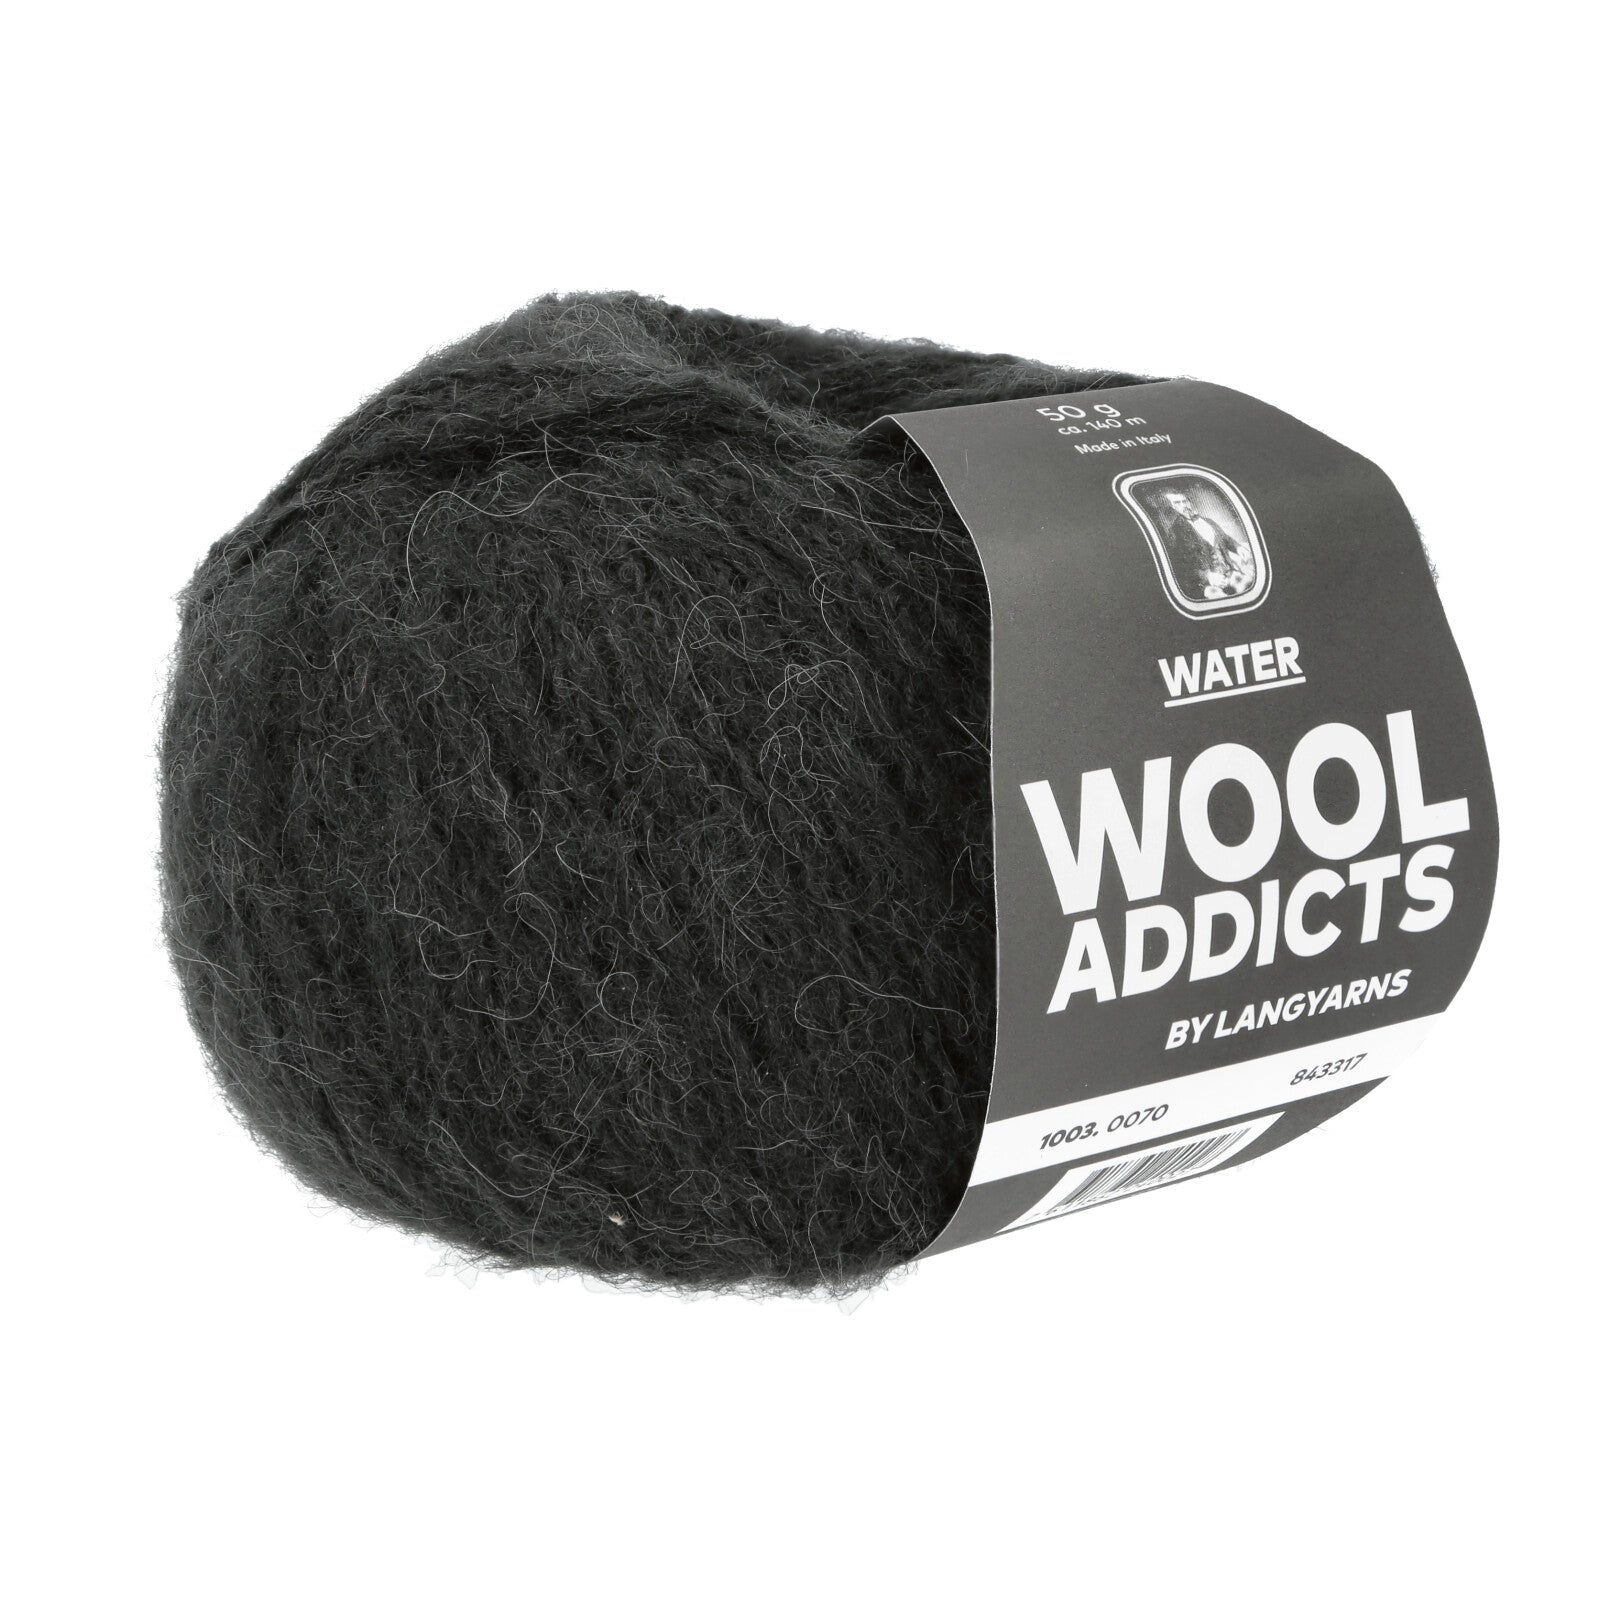 Wool Addicts Water in Colour 0070